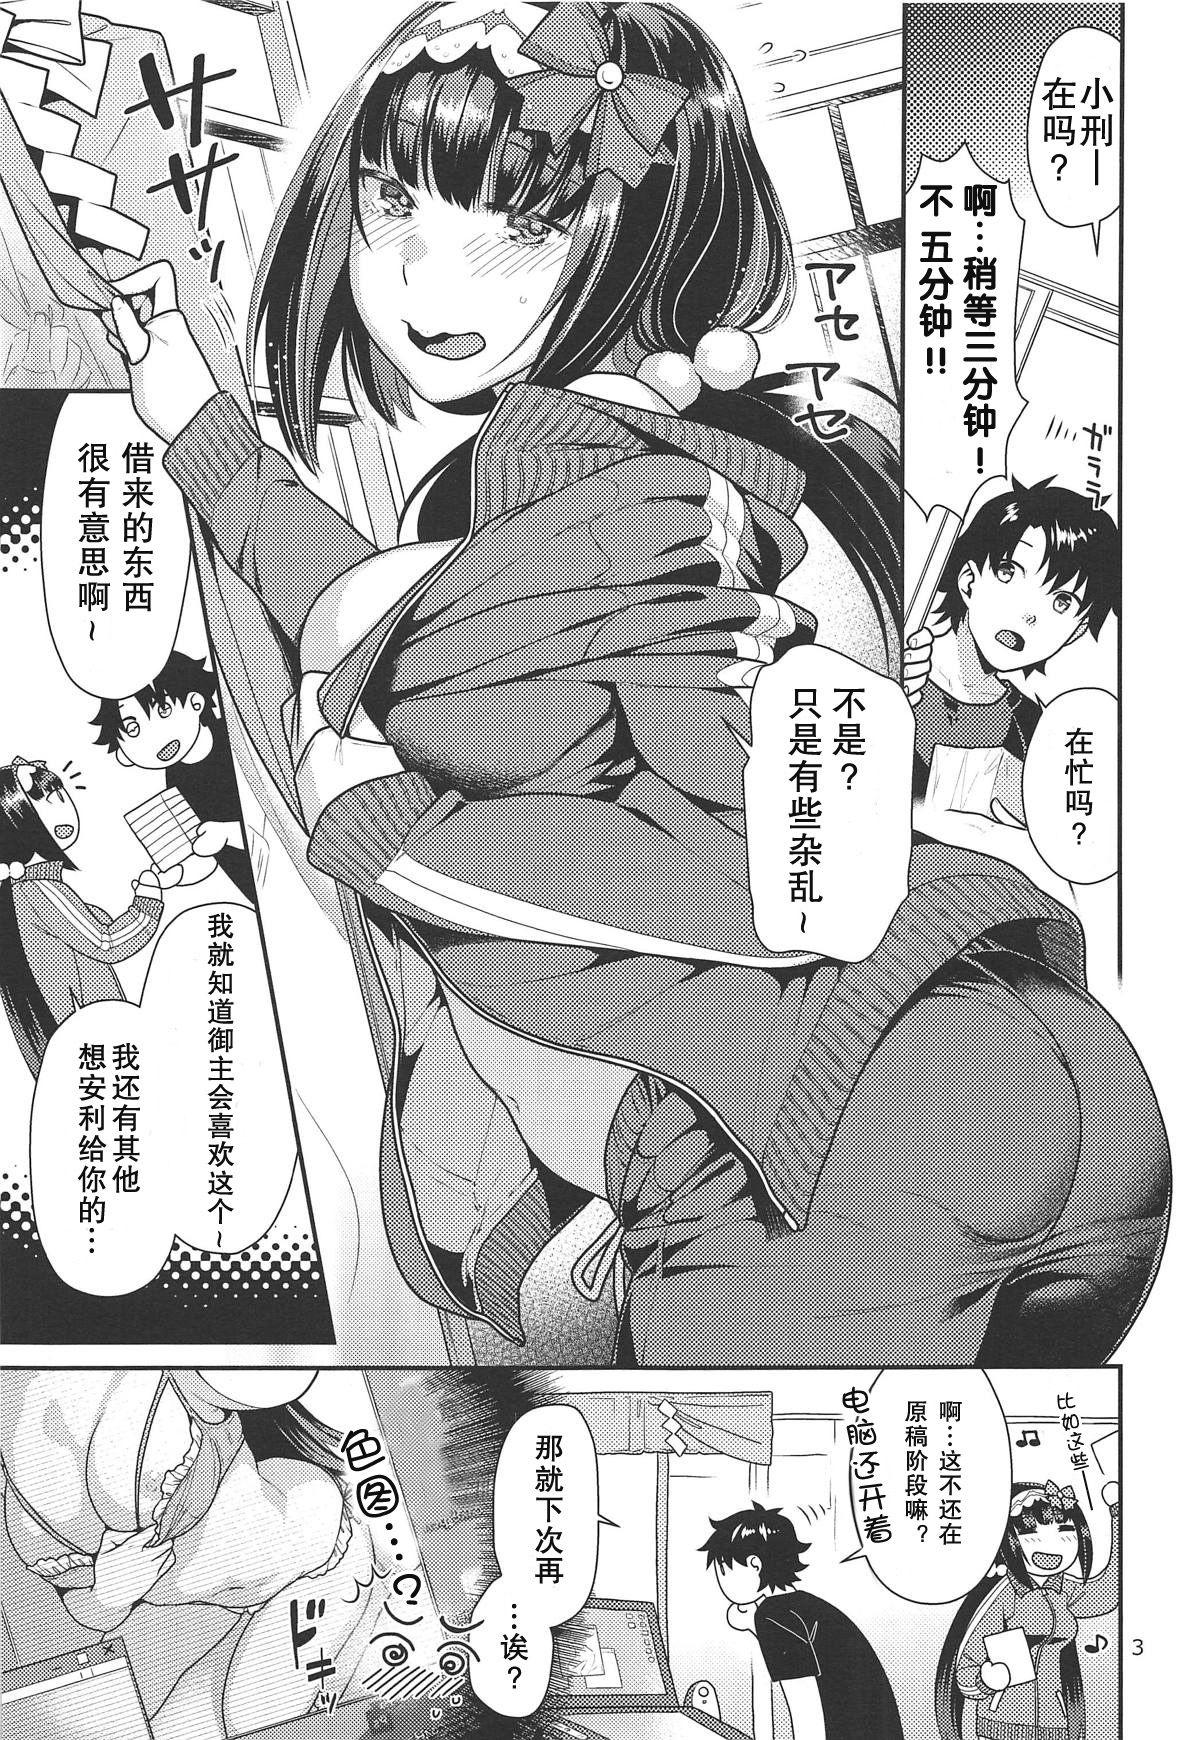 Skirt Hime to Jersey to Ero Shitagi - Fate grand order Ejaculation - Page 3